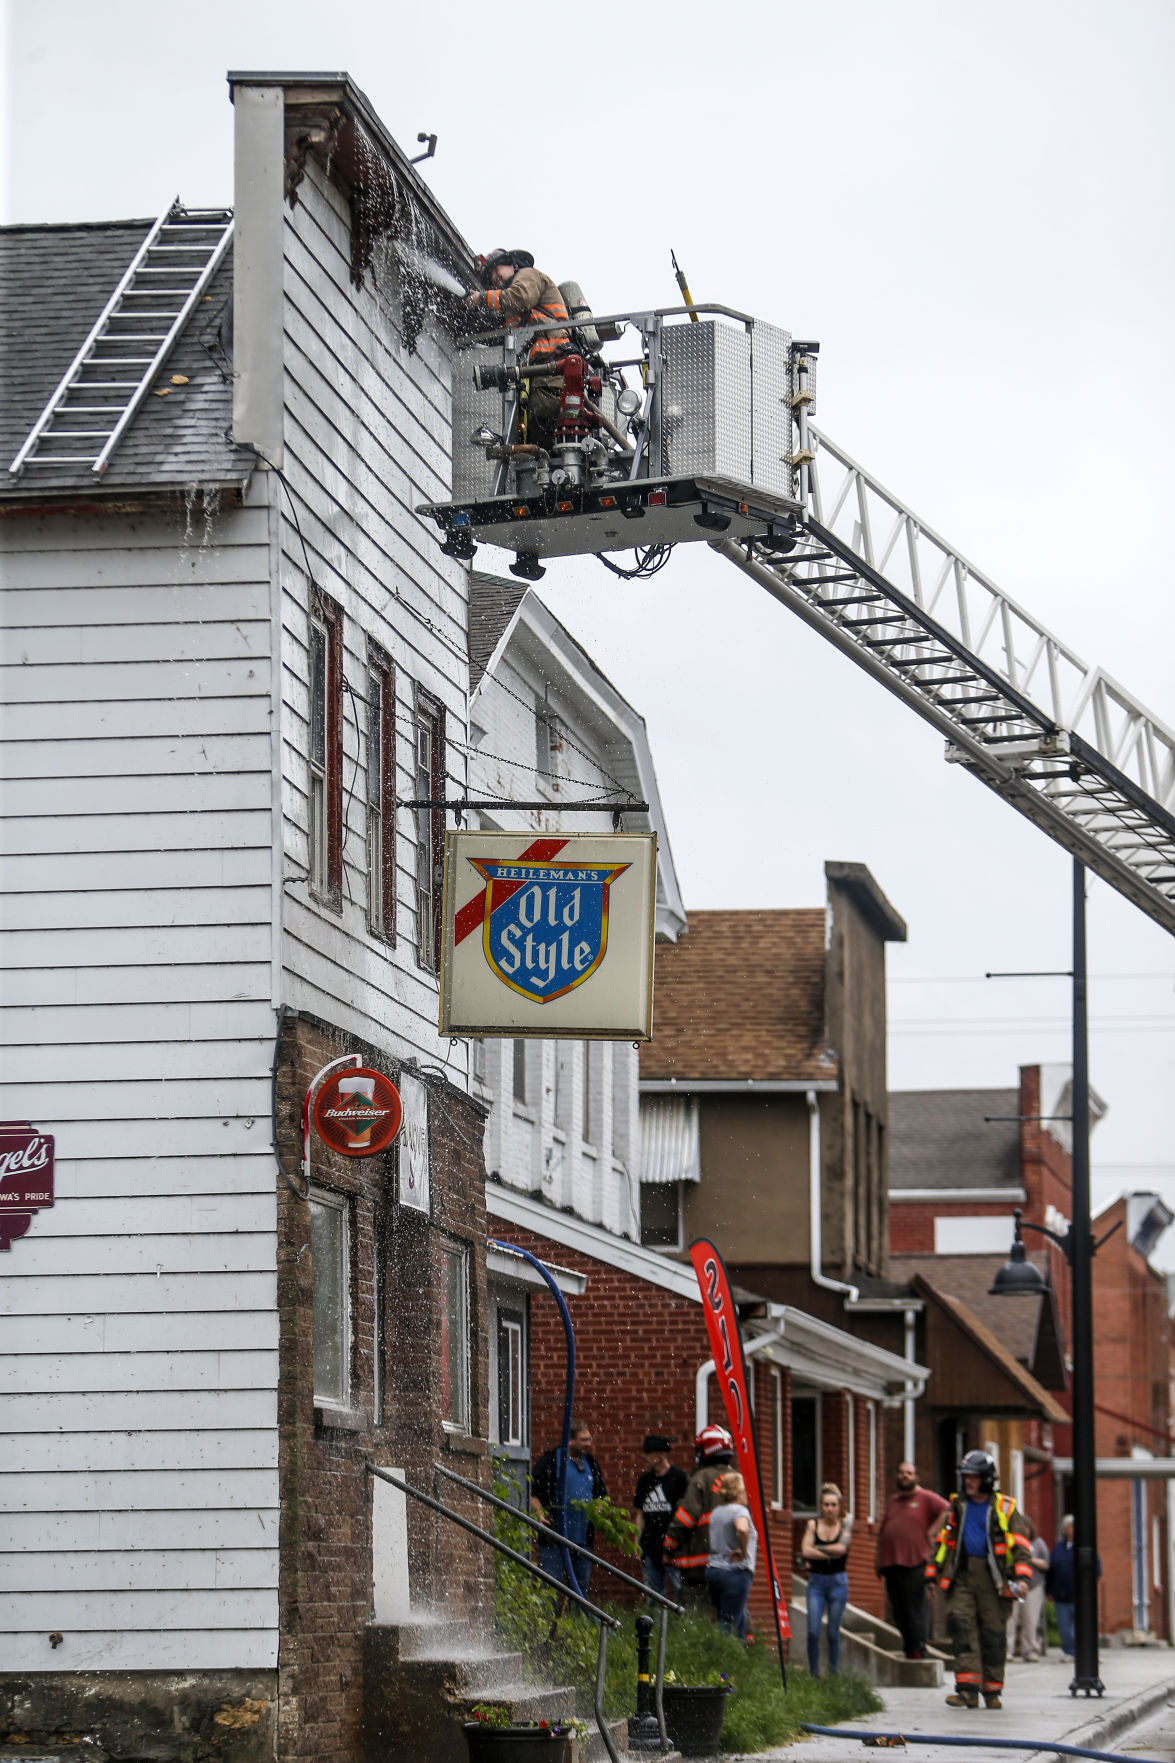 Firefighters look for hot spots after battling a blaze at 101 Jefferson St. in Hanover, Ill., on Wednesday, May 19, 2021. PHOTO CREDIT: Dave Kettering